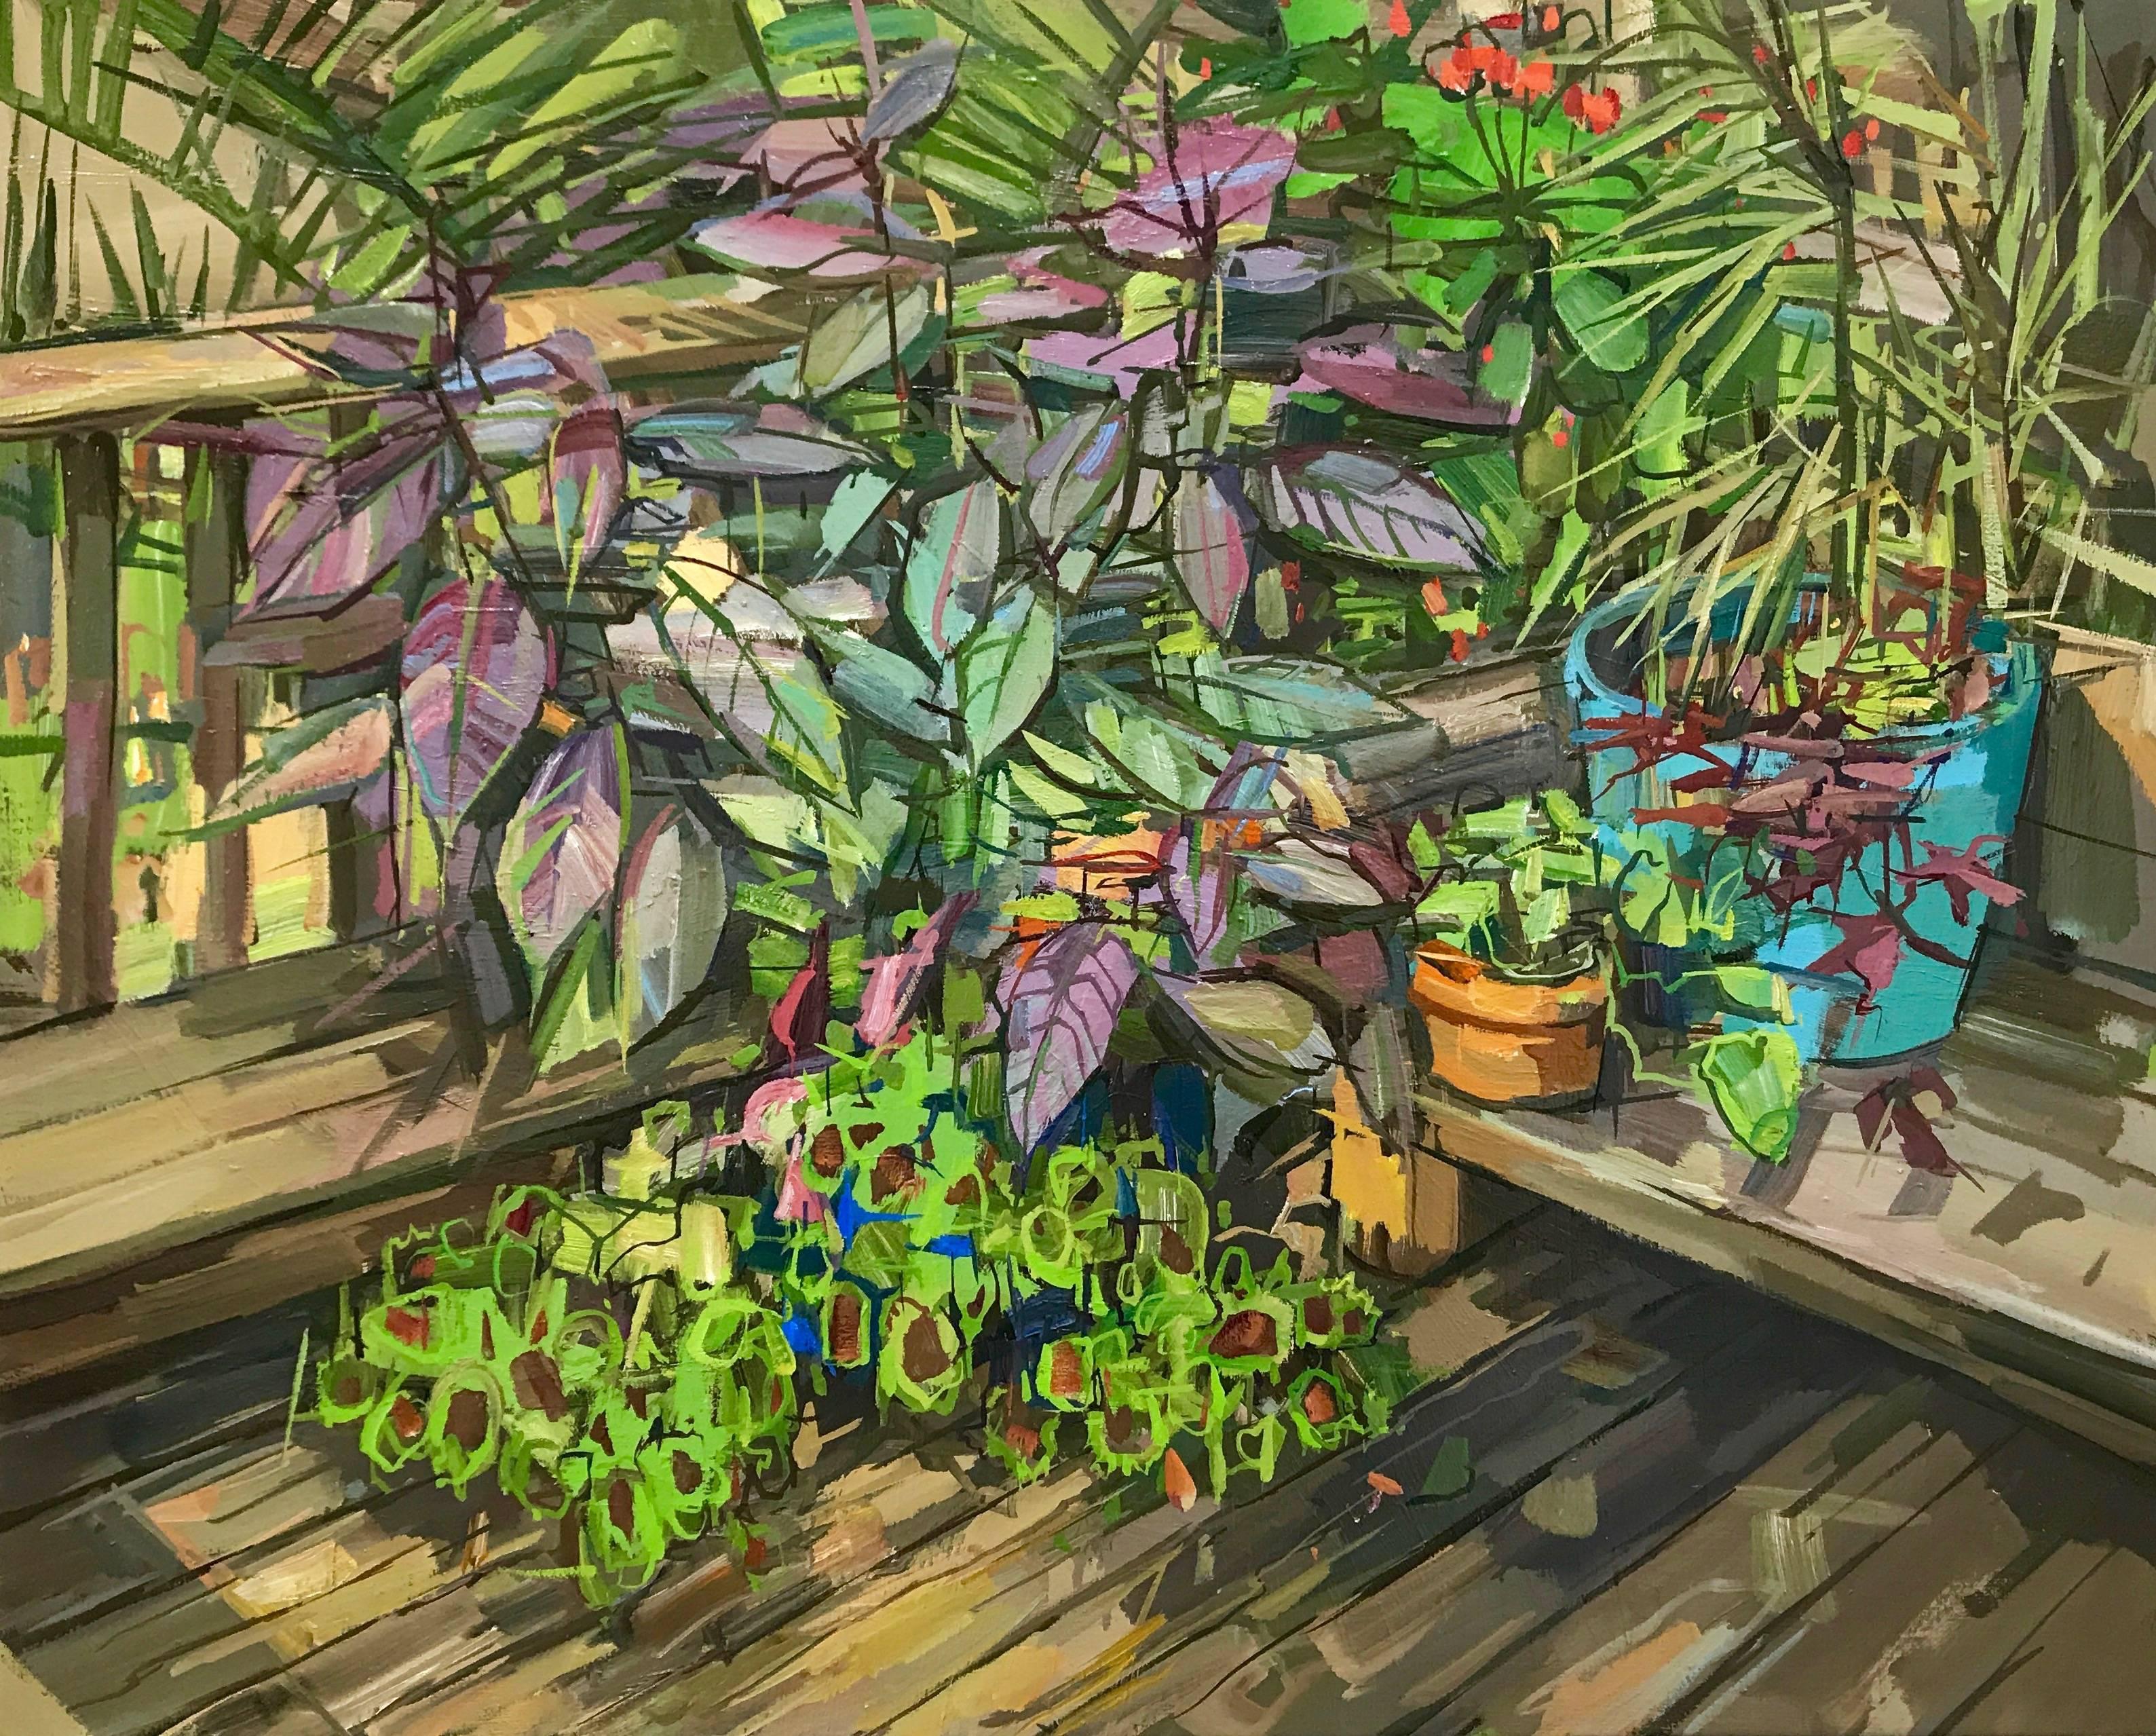 Francis Sills Still-Life Painting - Summer Garden II, Botanical, Plants in Bright Green, Purple, Brown on Wood Porch